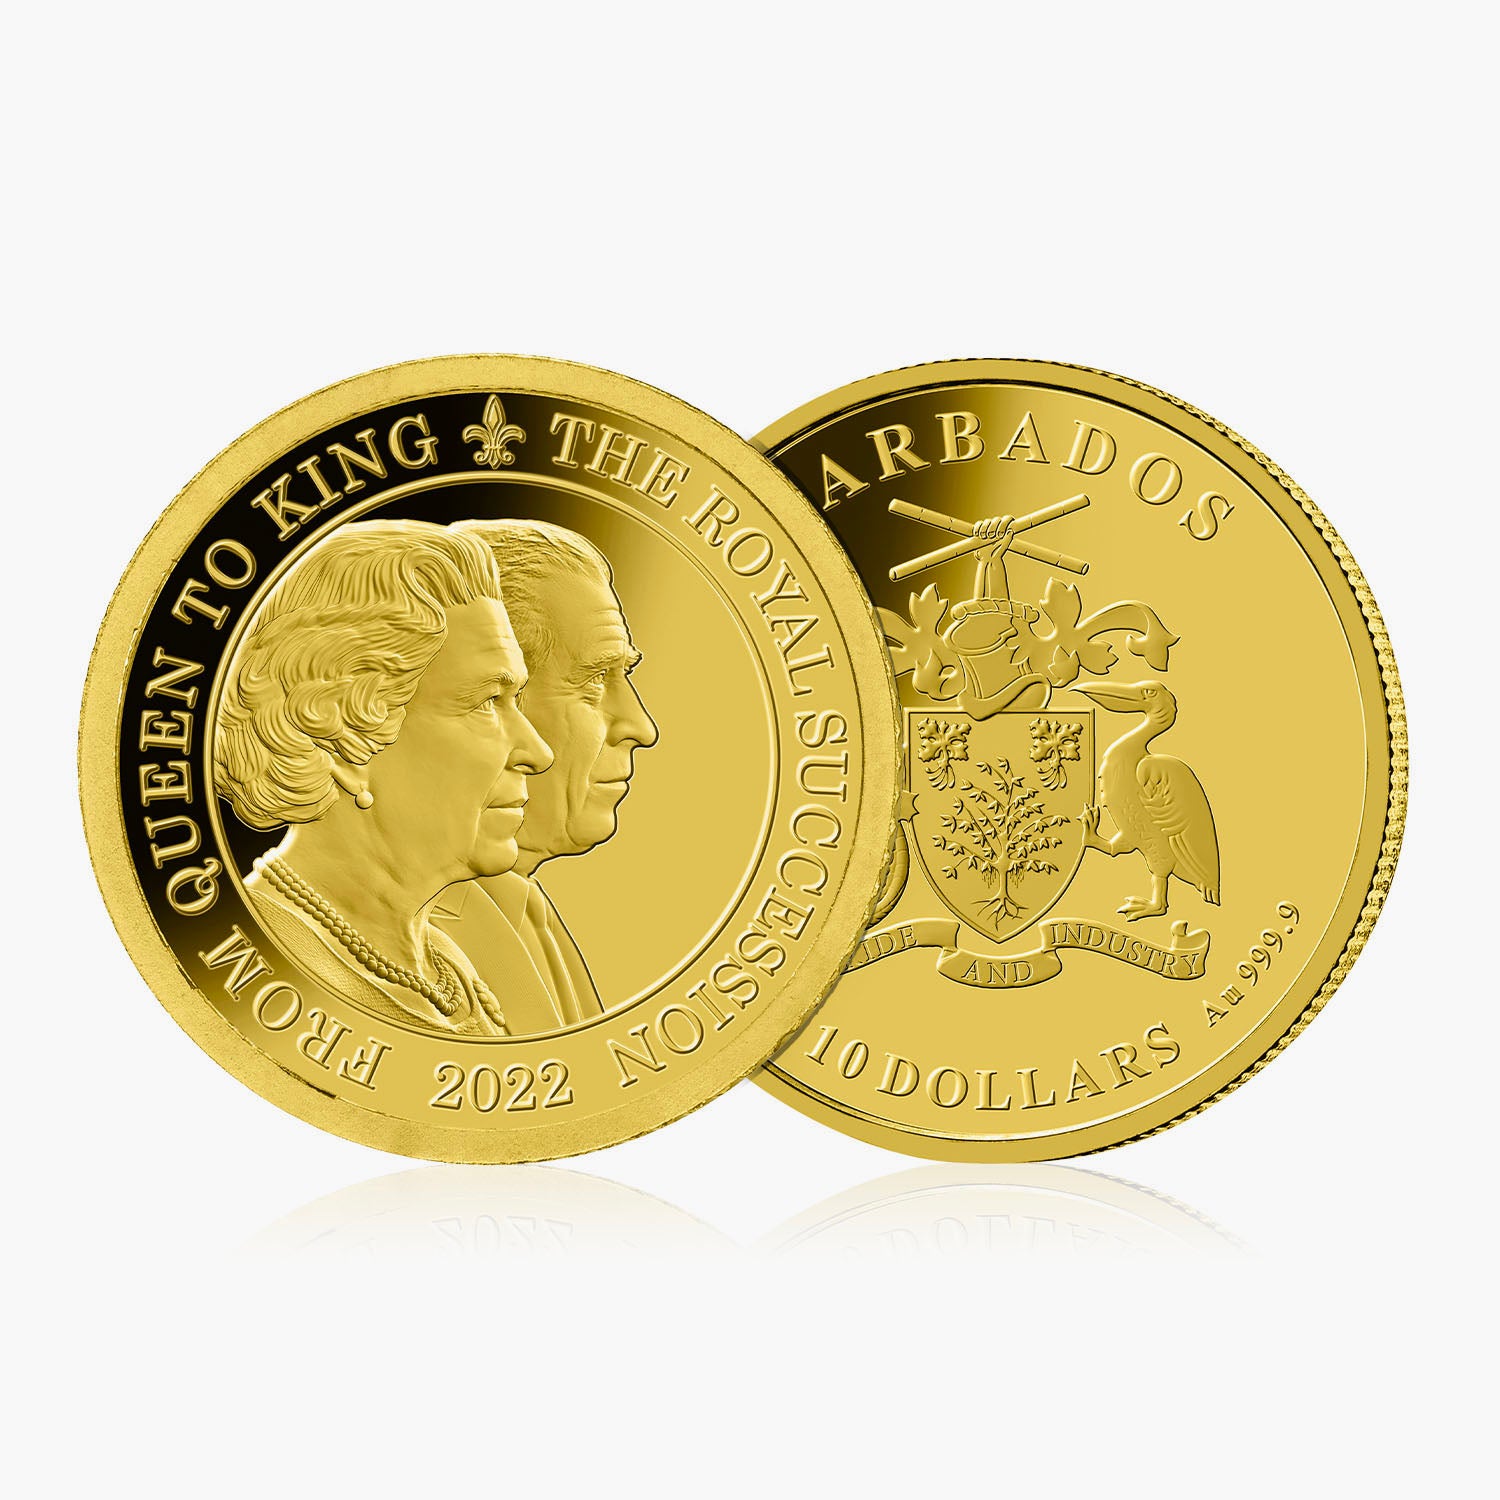 From Queen to King Double Portrait Solid Gold Coin